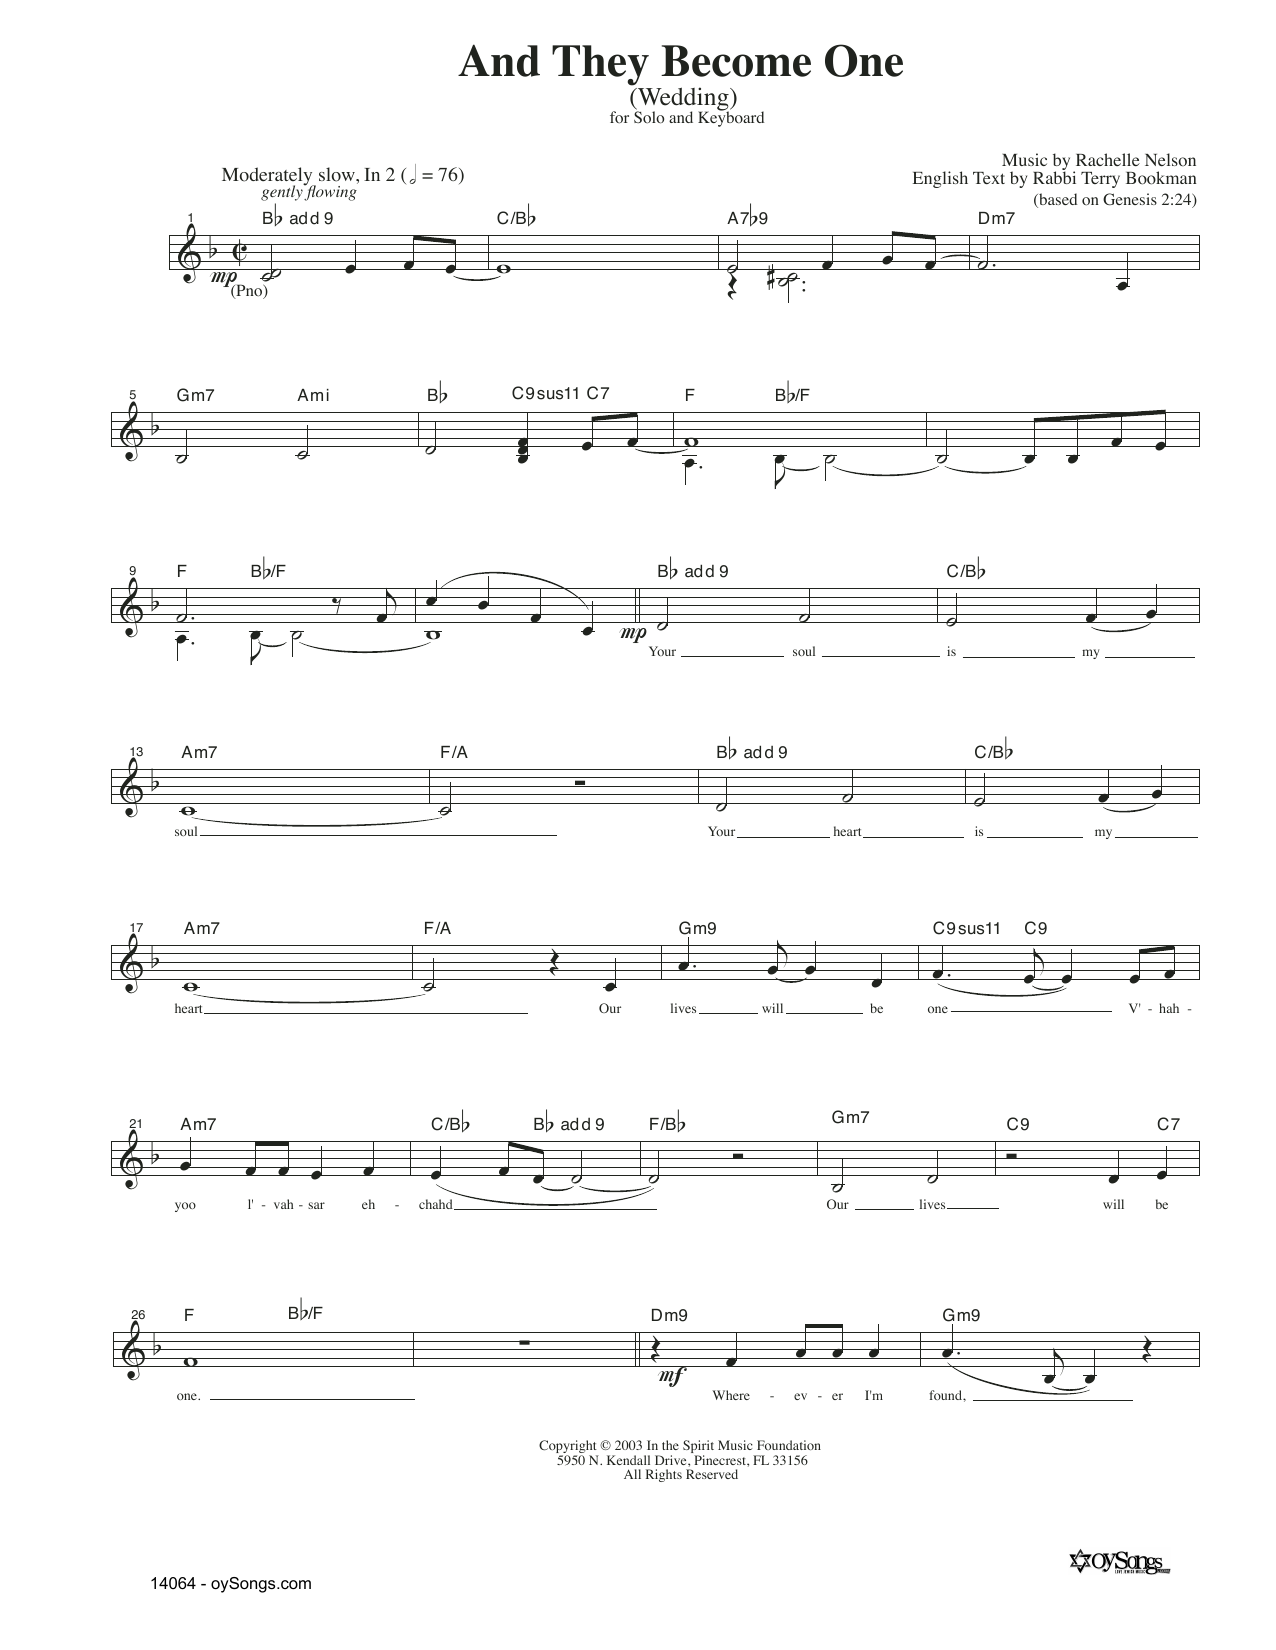 Download Rachelle Nelson And They Become One Sheet Music